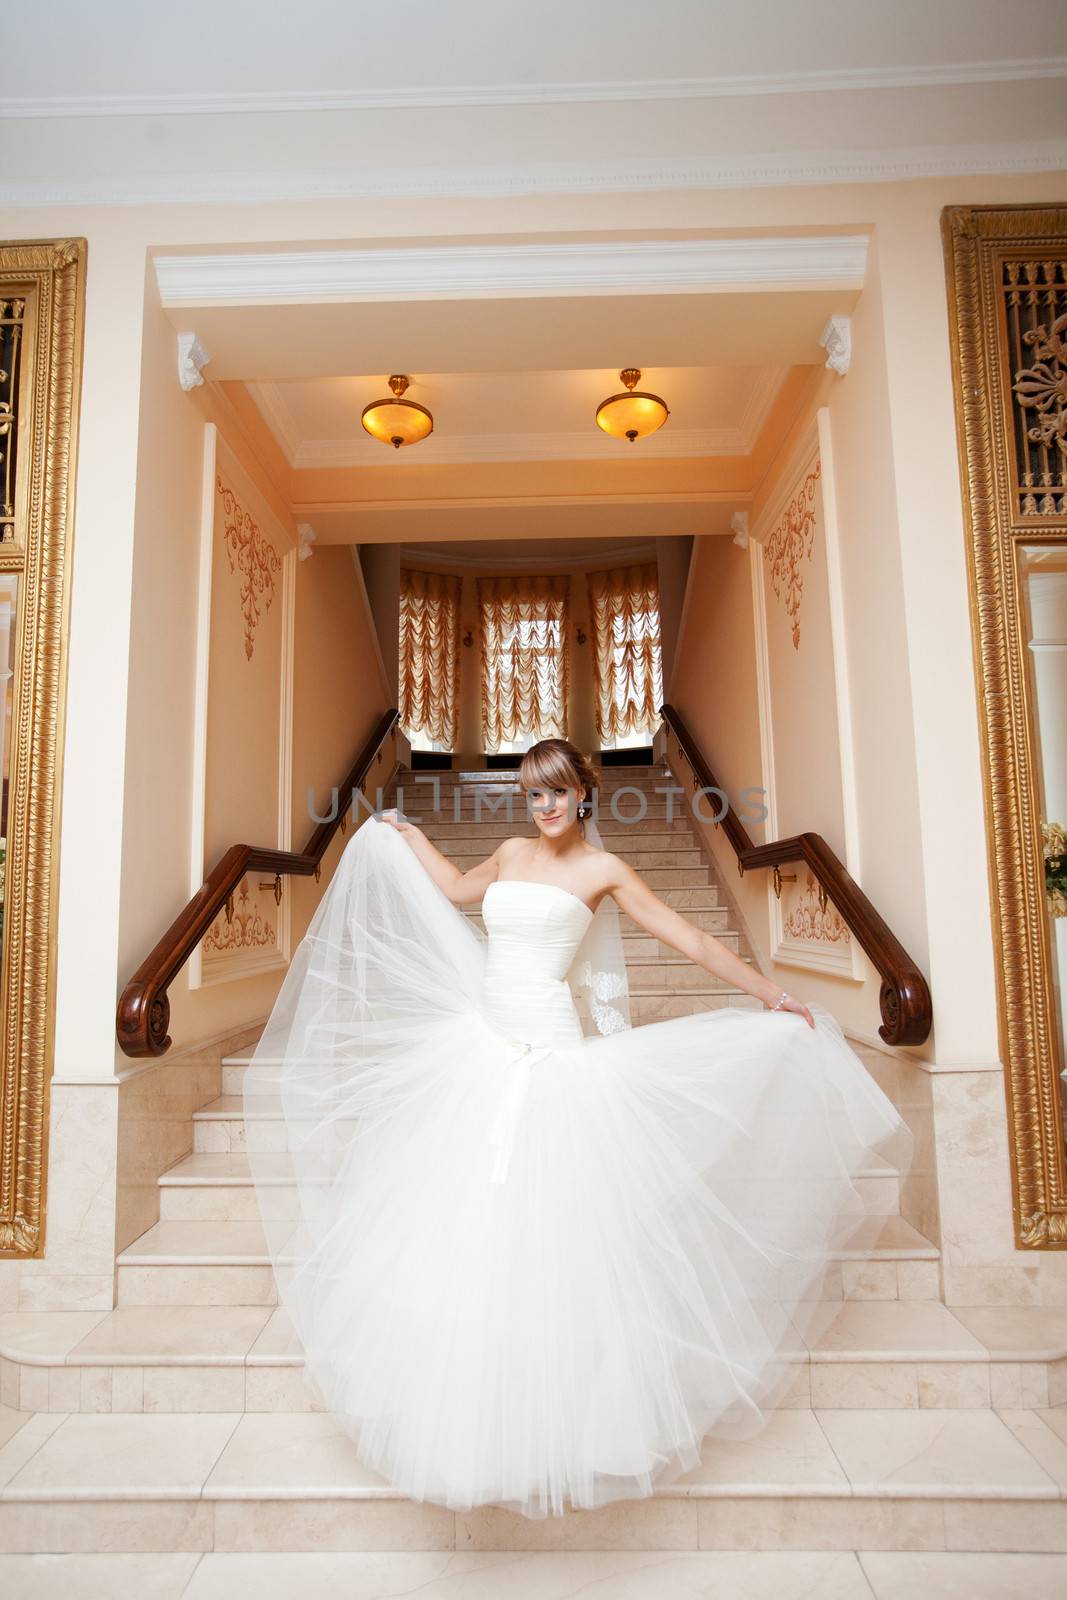 bride in hall with staircase by vsurkov